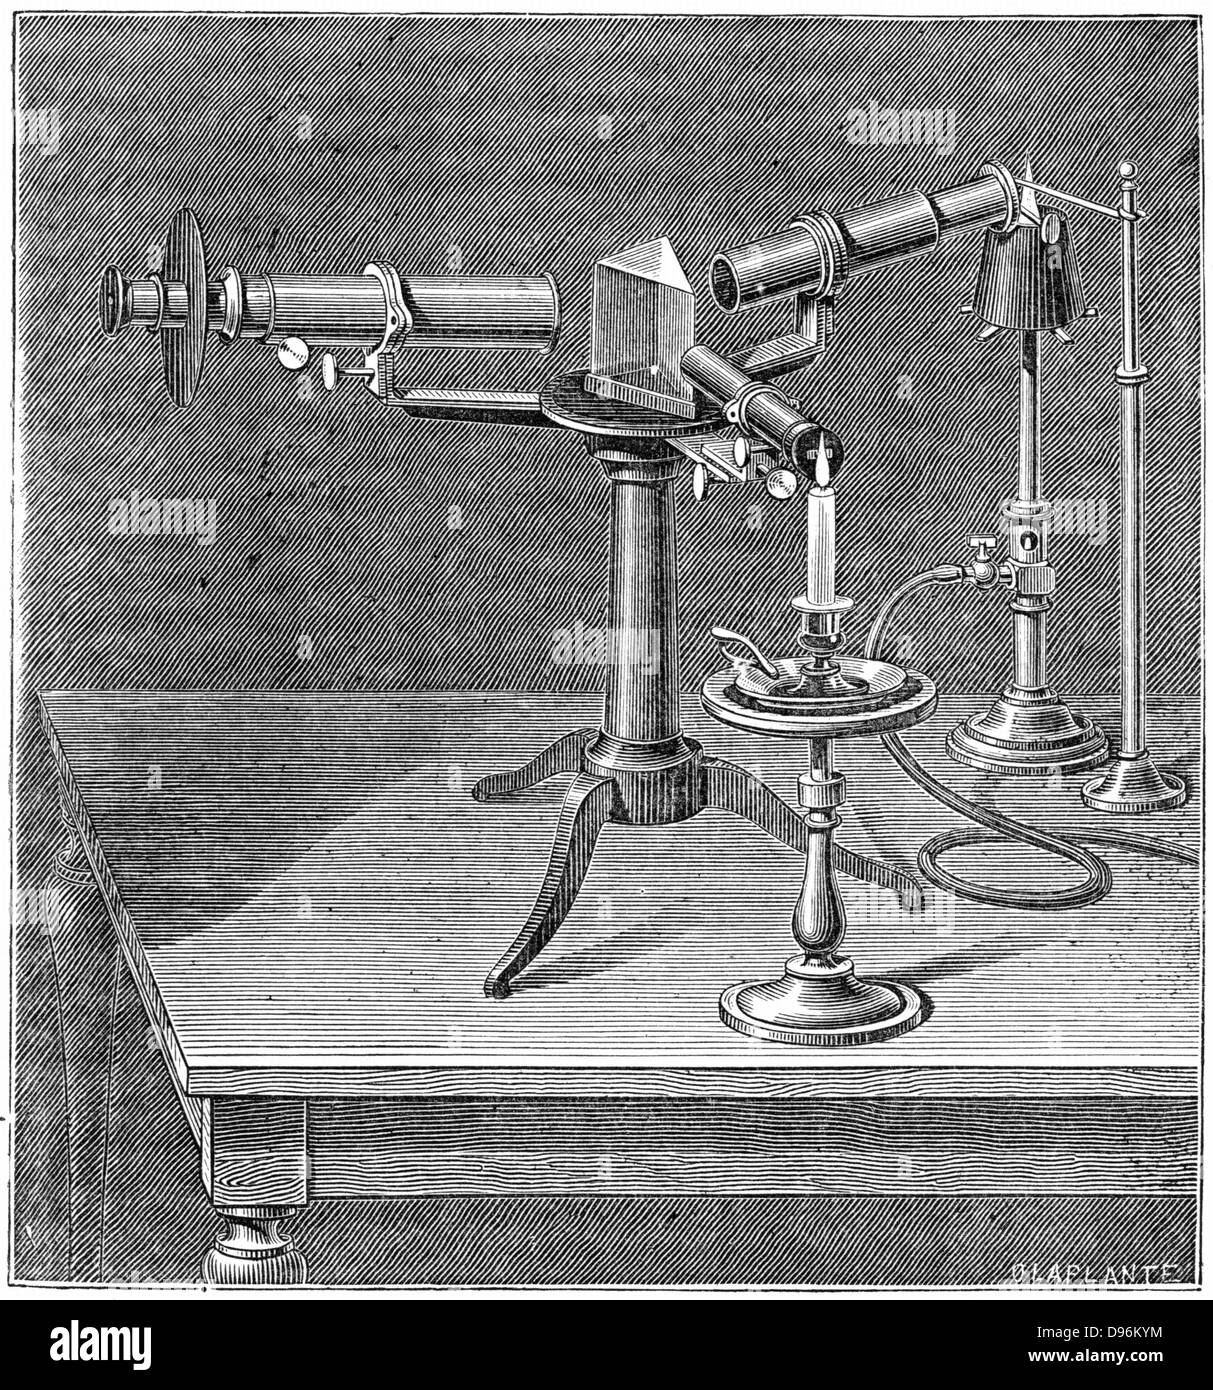 Spectroscope of the type used by Robert Wilhelm Bunsen (1811-1899) and Gustav Robert Kirchhoff (1824-1887). Discovered Spectrum Analysis (1859) which enabled discovery of elements including caesium and rubidium.  Engraving c1895. Stock Photo